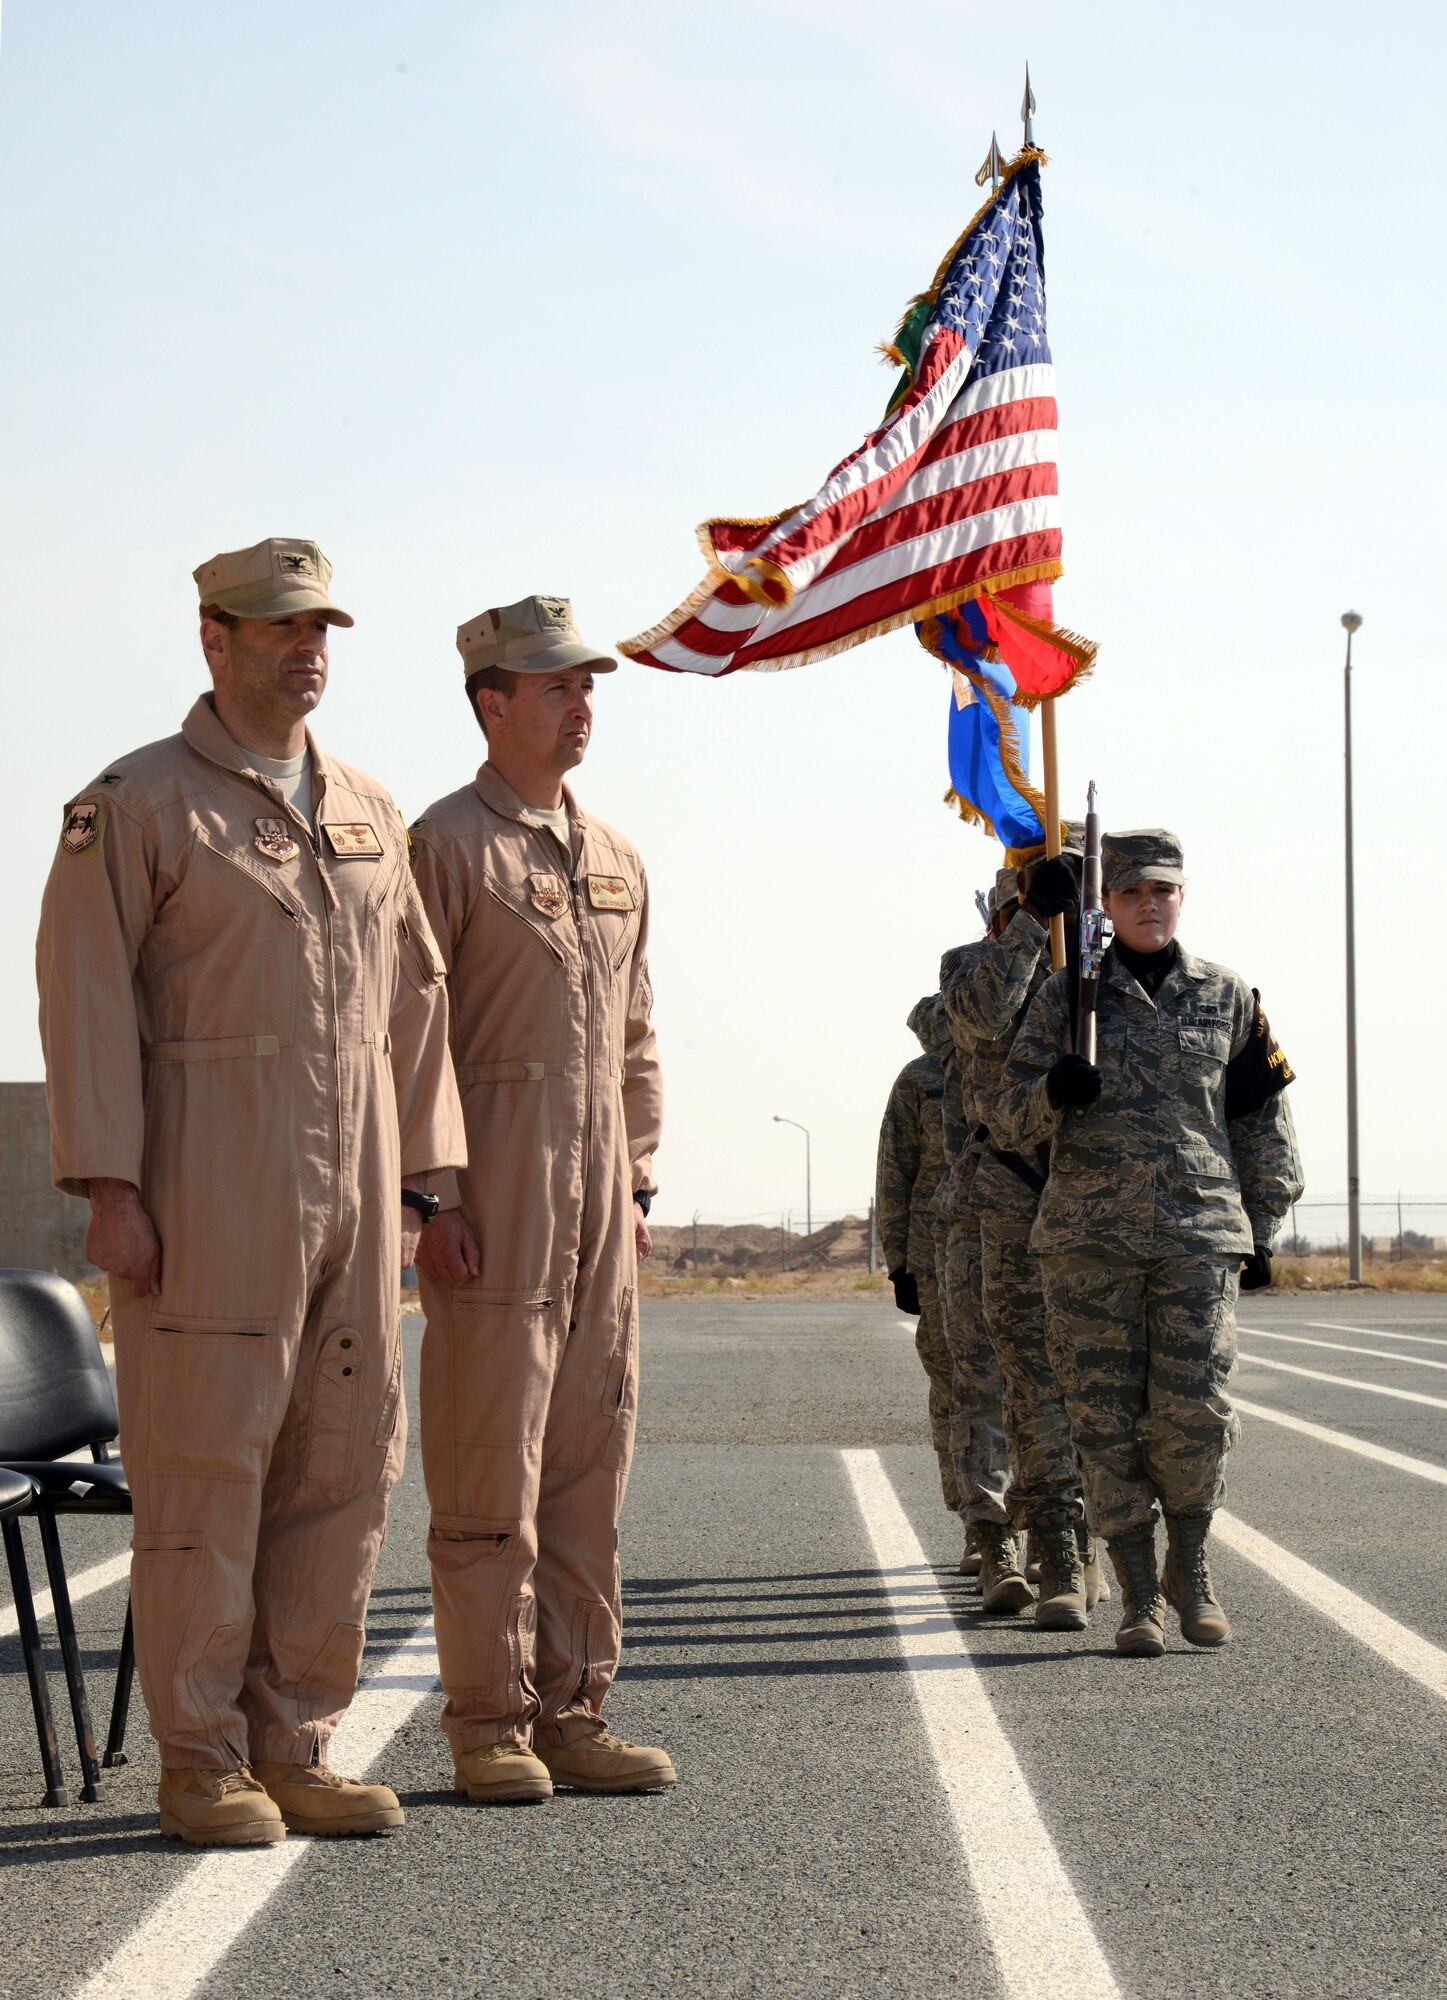 SOUTHWEST ASIA - Col. Jason Hanover, 386th Air Expeditionary Wing commander, and Col. Michael Stohler, 332nd Air Expeditionary Group commander, stand as the colors are posted during the 332nd AEG reactivation and assumption of command ceremony Nov. 16, 2014. The 332nd AEG has a storied history and is descended from the 332nd Fighter Group - the famed Tuskegee Airmen, also known as the Red Tails. (U.S. Air Force photo by Tech. Sgt. Jared Marquis/released)  